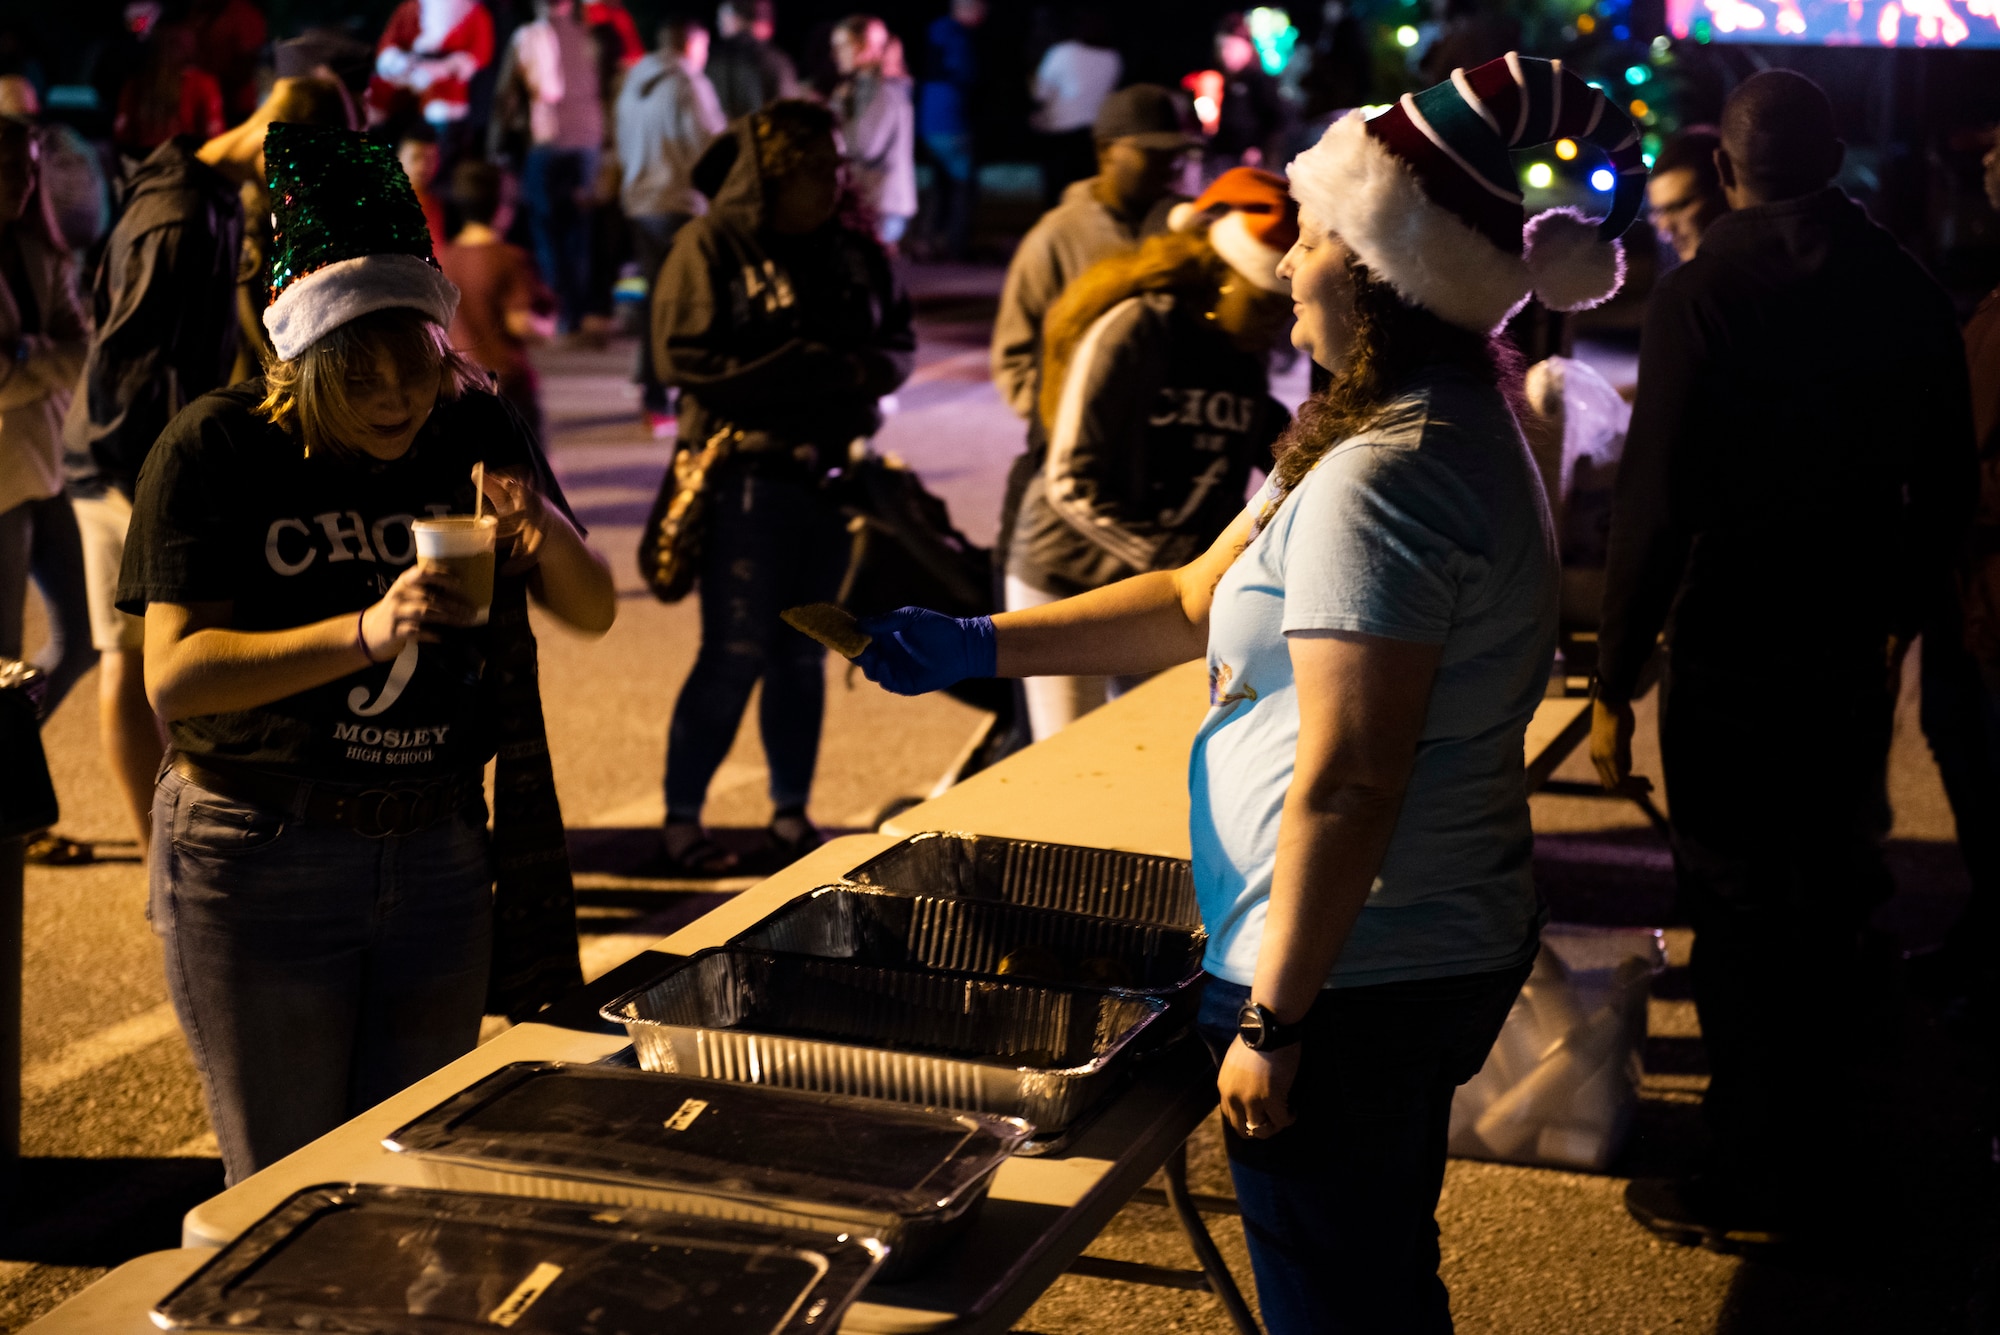 A volunteer offers a cookie to an event attendee at the 325th Force Support Squadron holiday tree lighting ceremony at Tyndall Air Force Base, Florida, Dec. 6, 2019. The annual event was held at the base's Oasis Event Center, and was attended by service members, their spouses, dependents, local students and retirees. (U.S. Air Force photo by Staff Sgt. Magen M. Reeves)